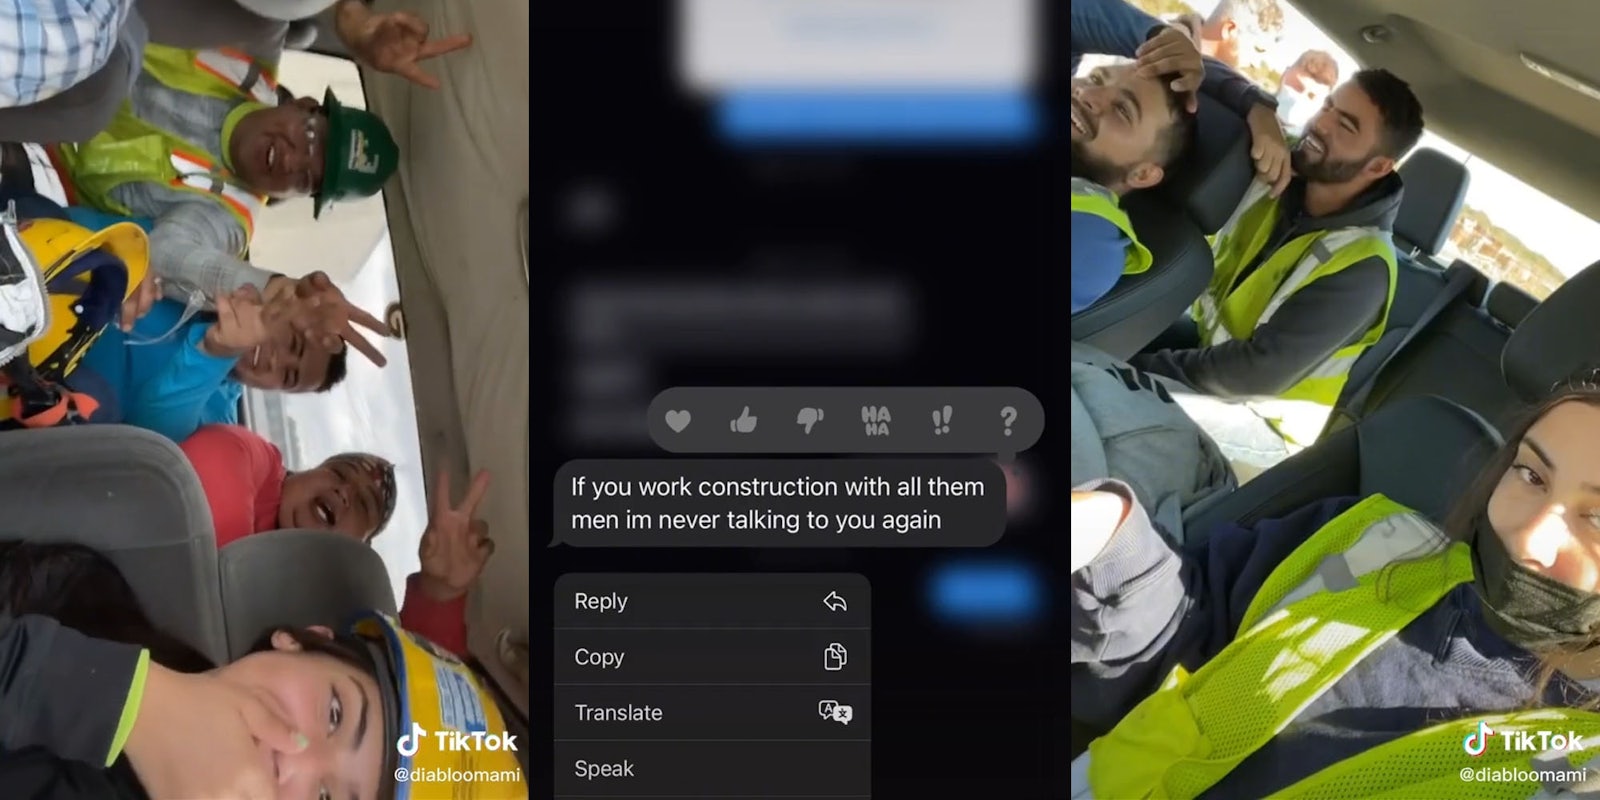 women with coworkers in car wearing construction uniforms (l) text messages 'If you work construction with all them men im never talking to you again' (c) woman in ca with coworkers in construction uniforms (r)